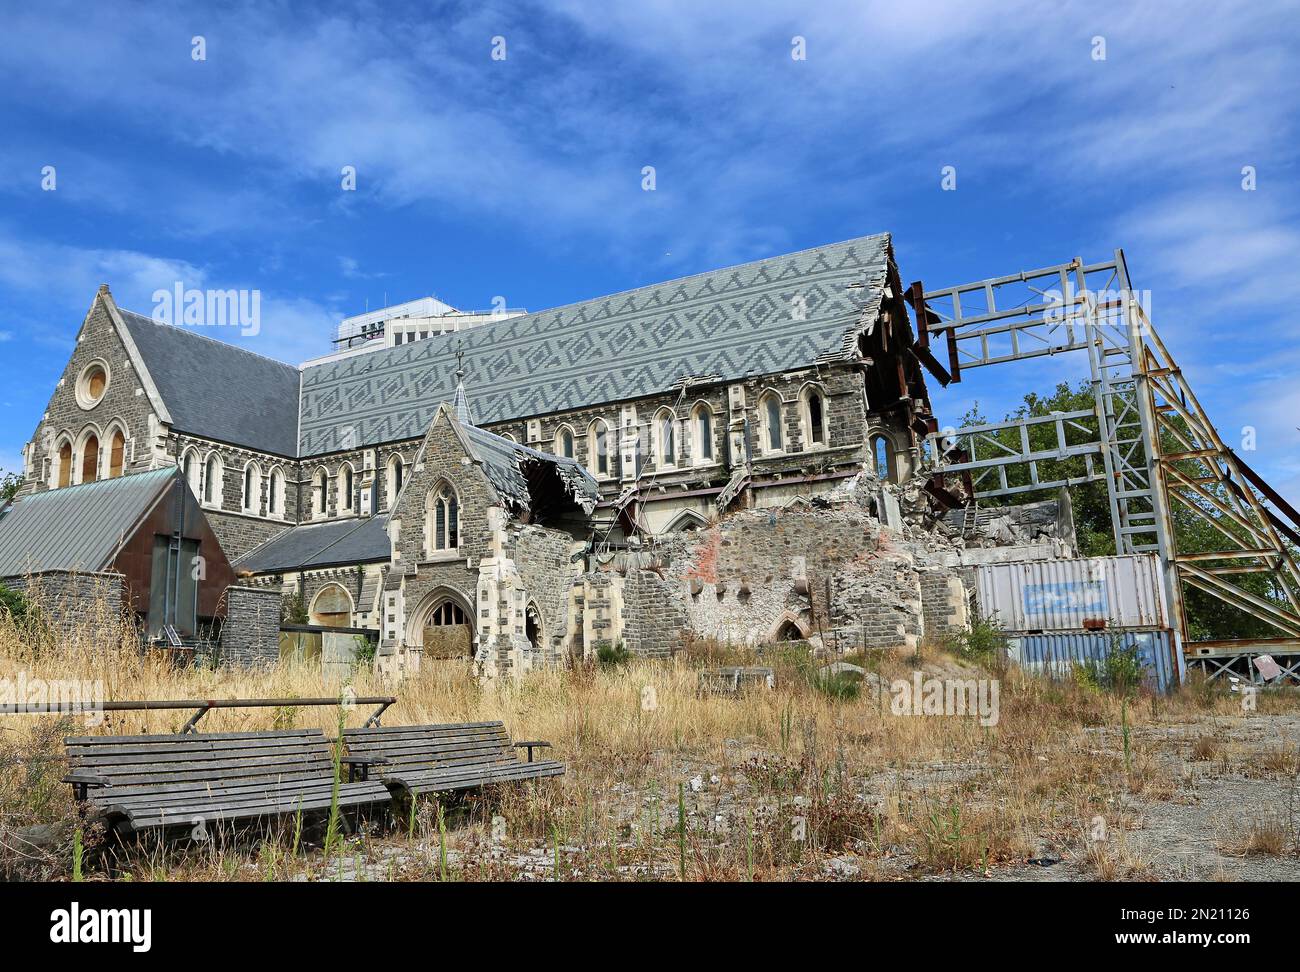 Christchurch cathedral ruined after earthquake, New Zealand Stock Photo